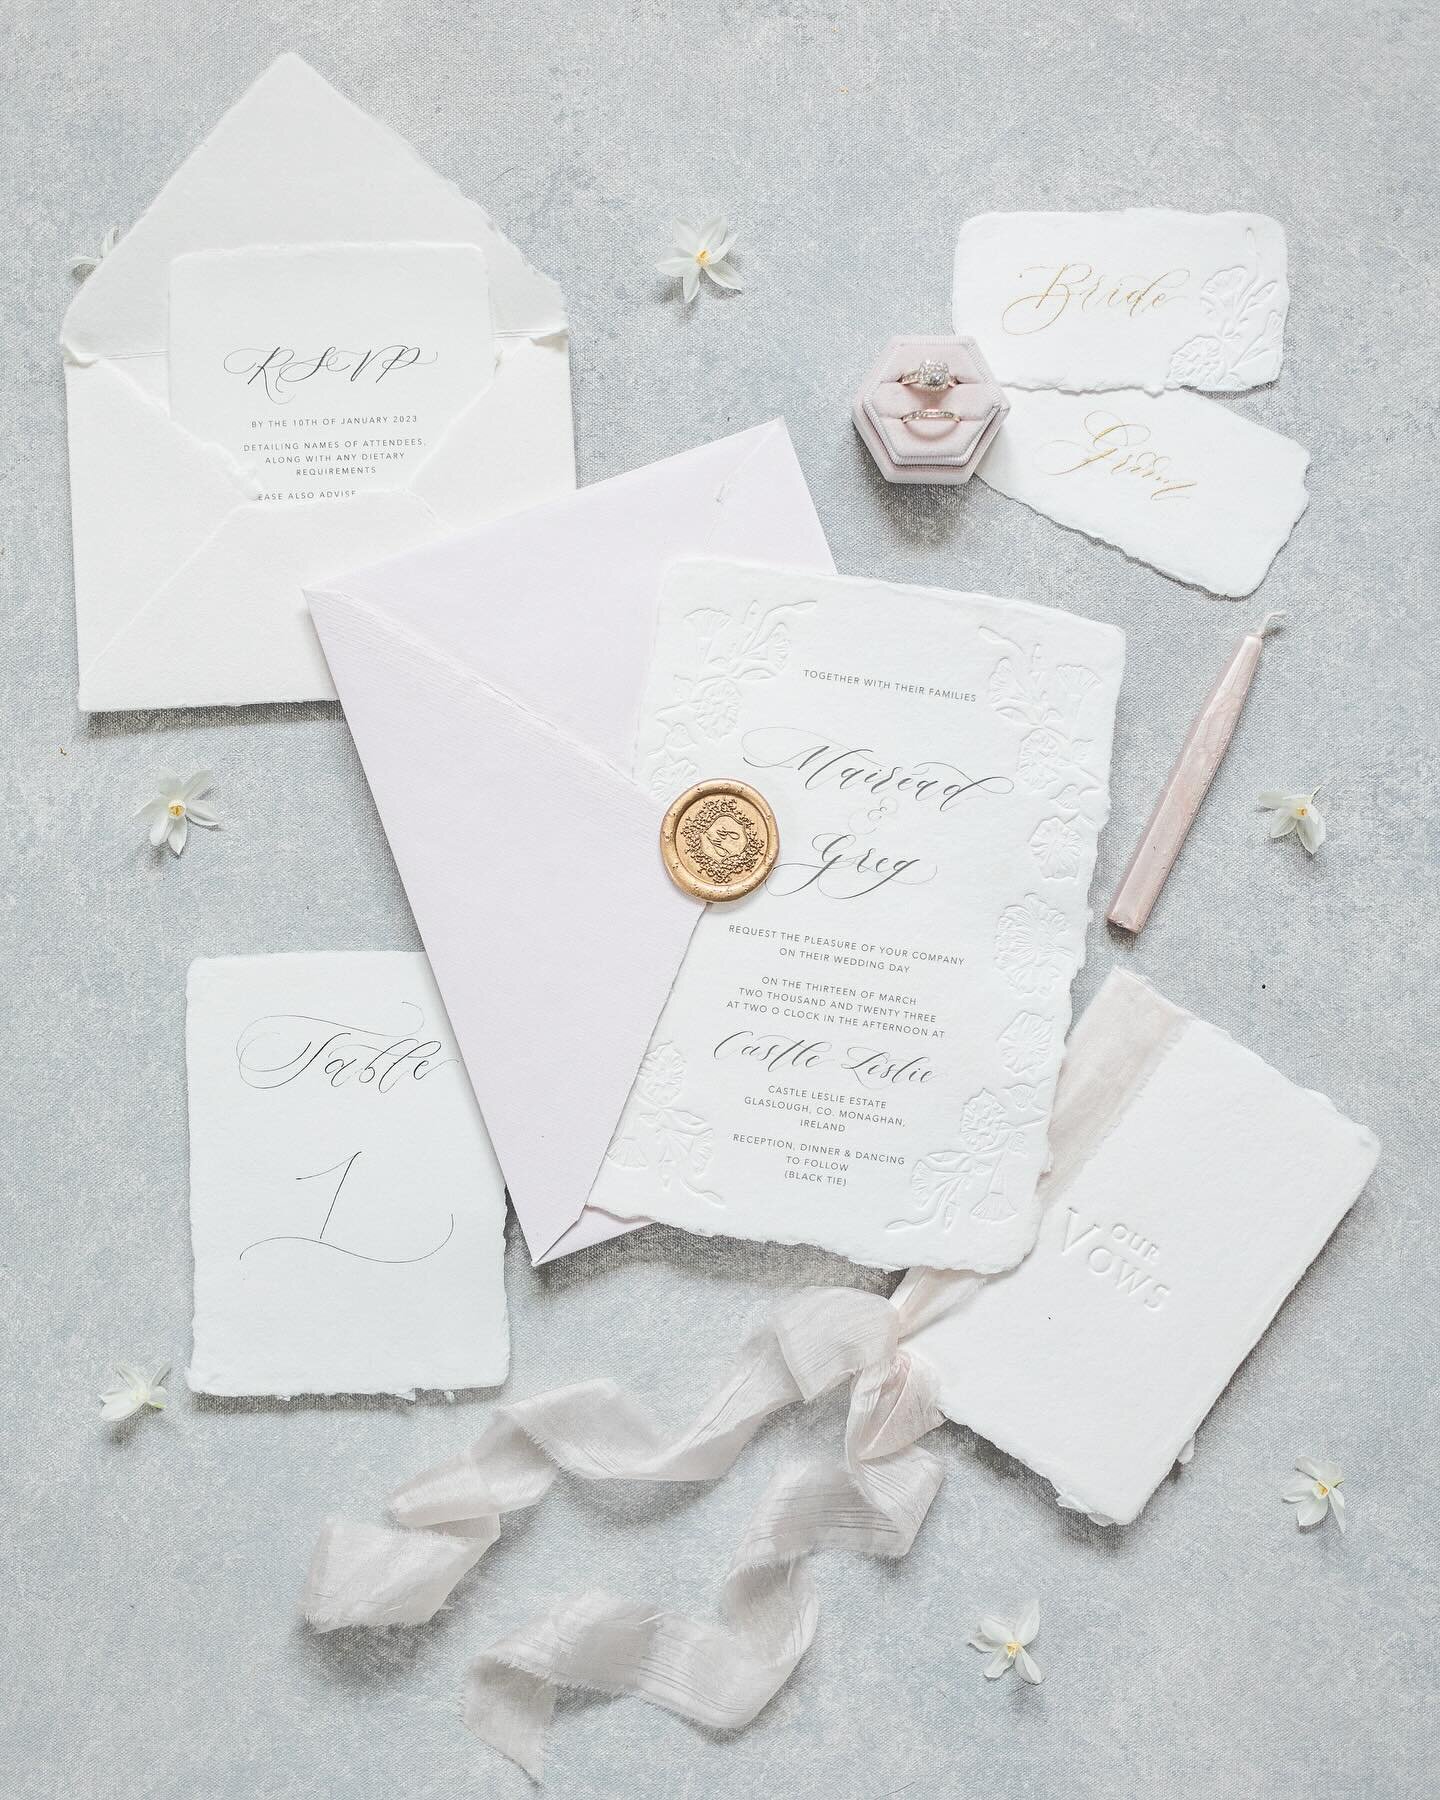 Starry little paper white flowers giving this beautiful flatlay a magical feel ✨

Stunning stationery by @calligraphybylaura and flatlay styling by @wonderandmagicie 🕊

Photography: @wonderandmagicie
Stationery: @calligraphybylaura
Florals: @fleurwe